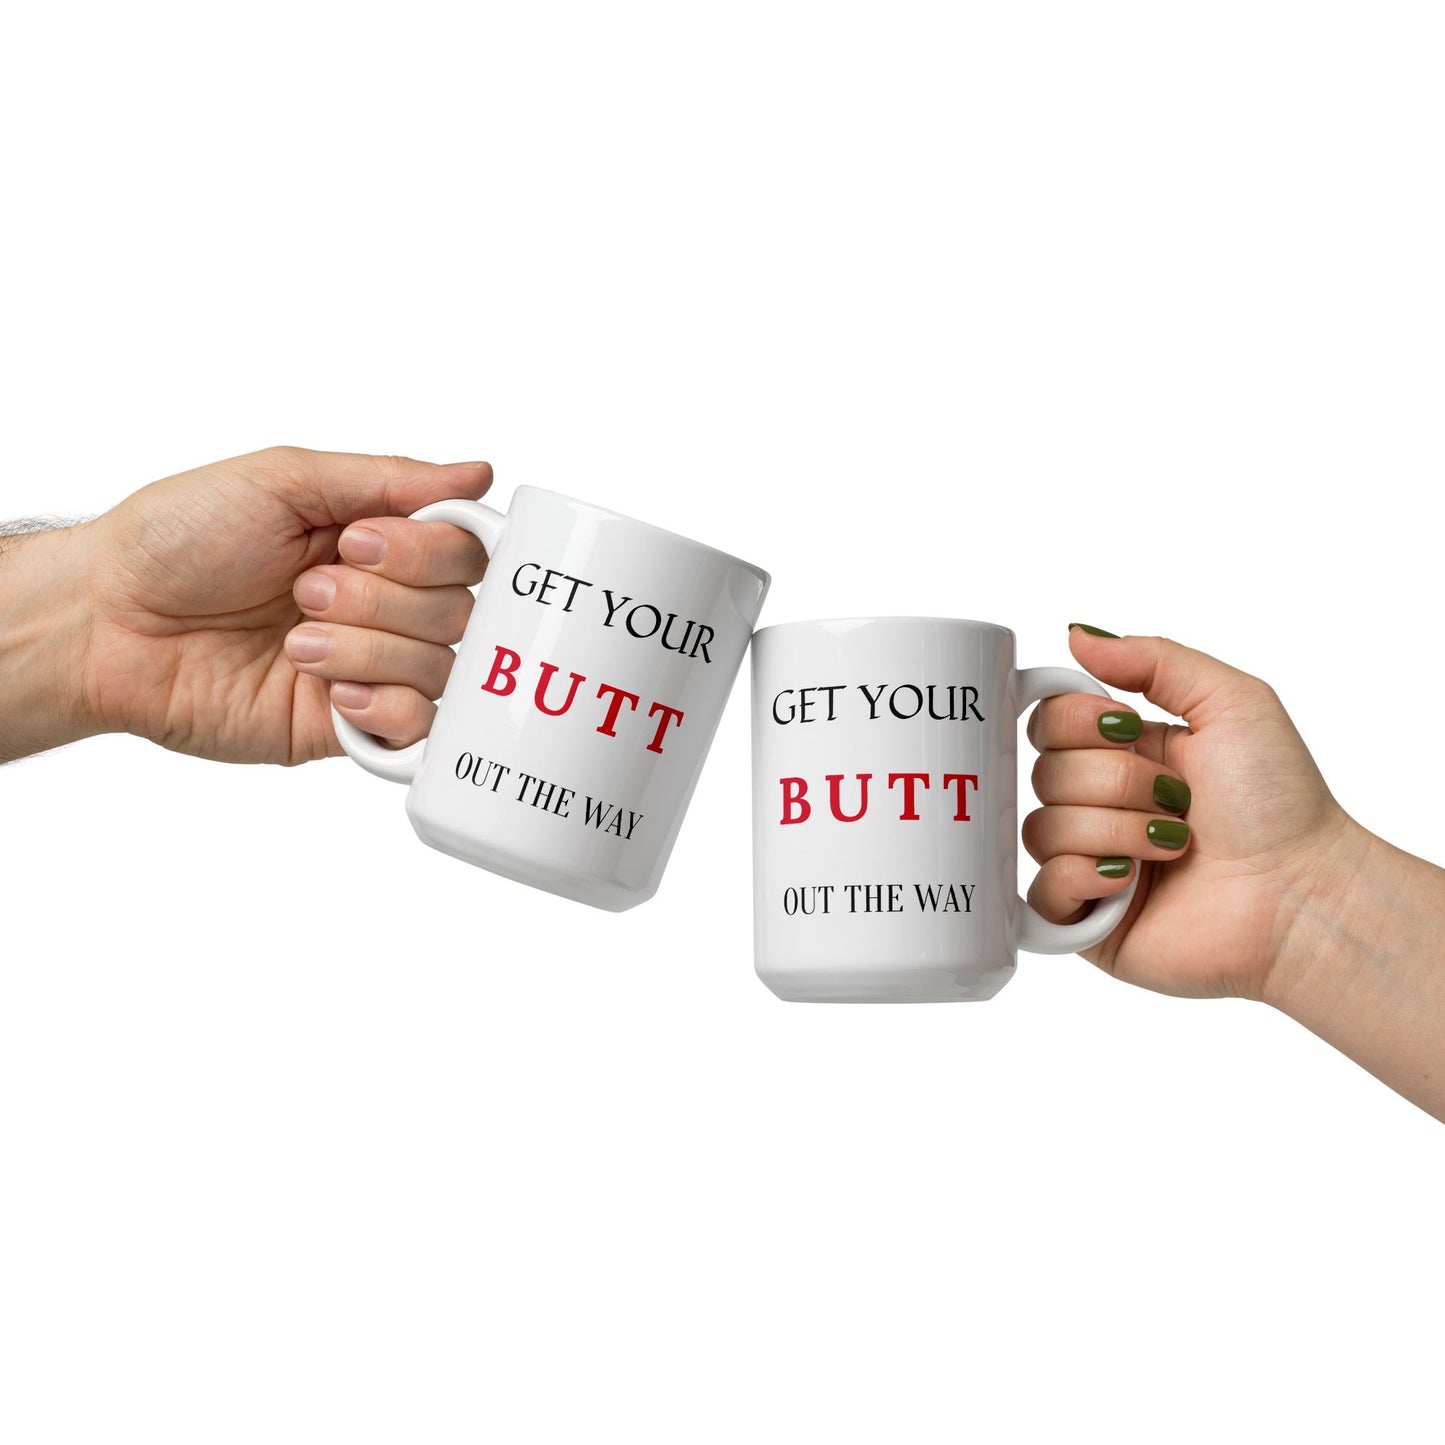 With an attention-grabbing Get Your BUTT Out The Way design, this white glossy mug is perfect to start your day off with enthusiasm. Enjoy your morning coffee, tea, or hot cocoa in a vibrant mug that will make you feel energized and motivated.